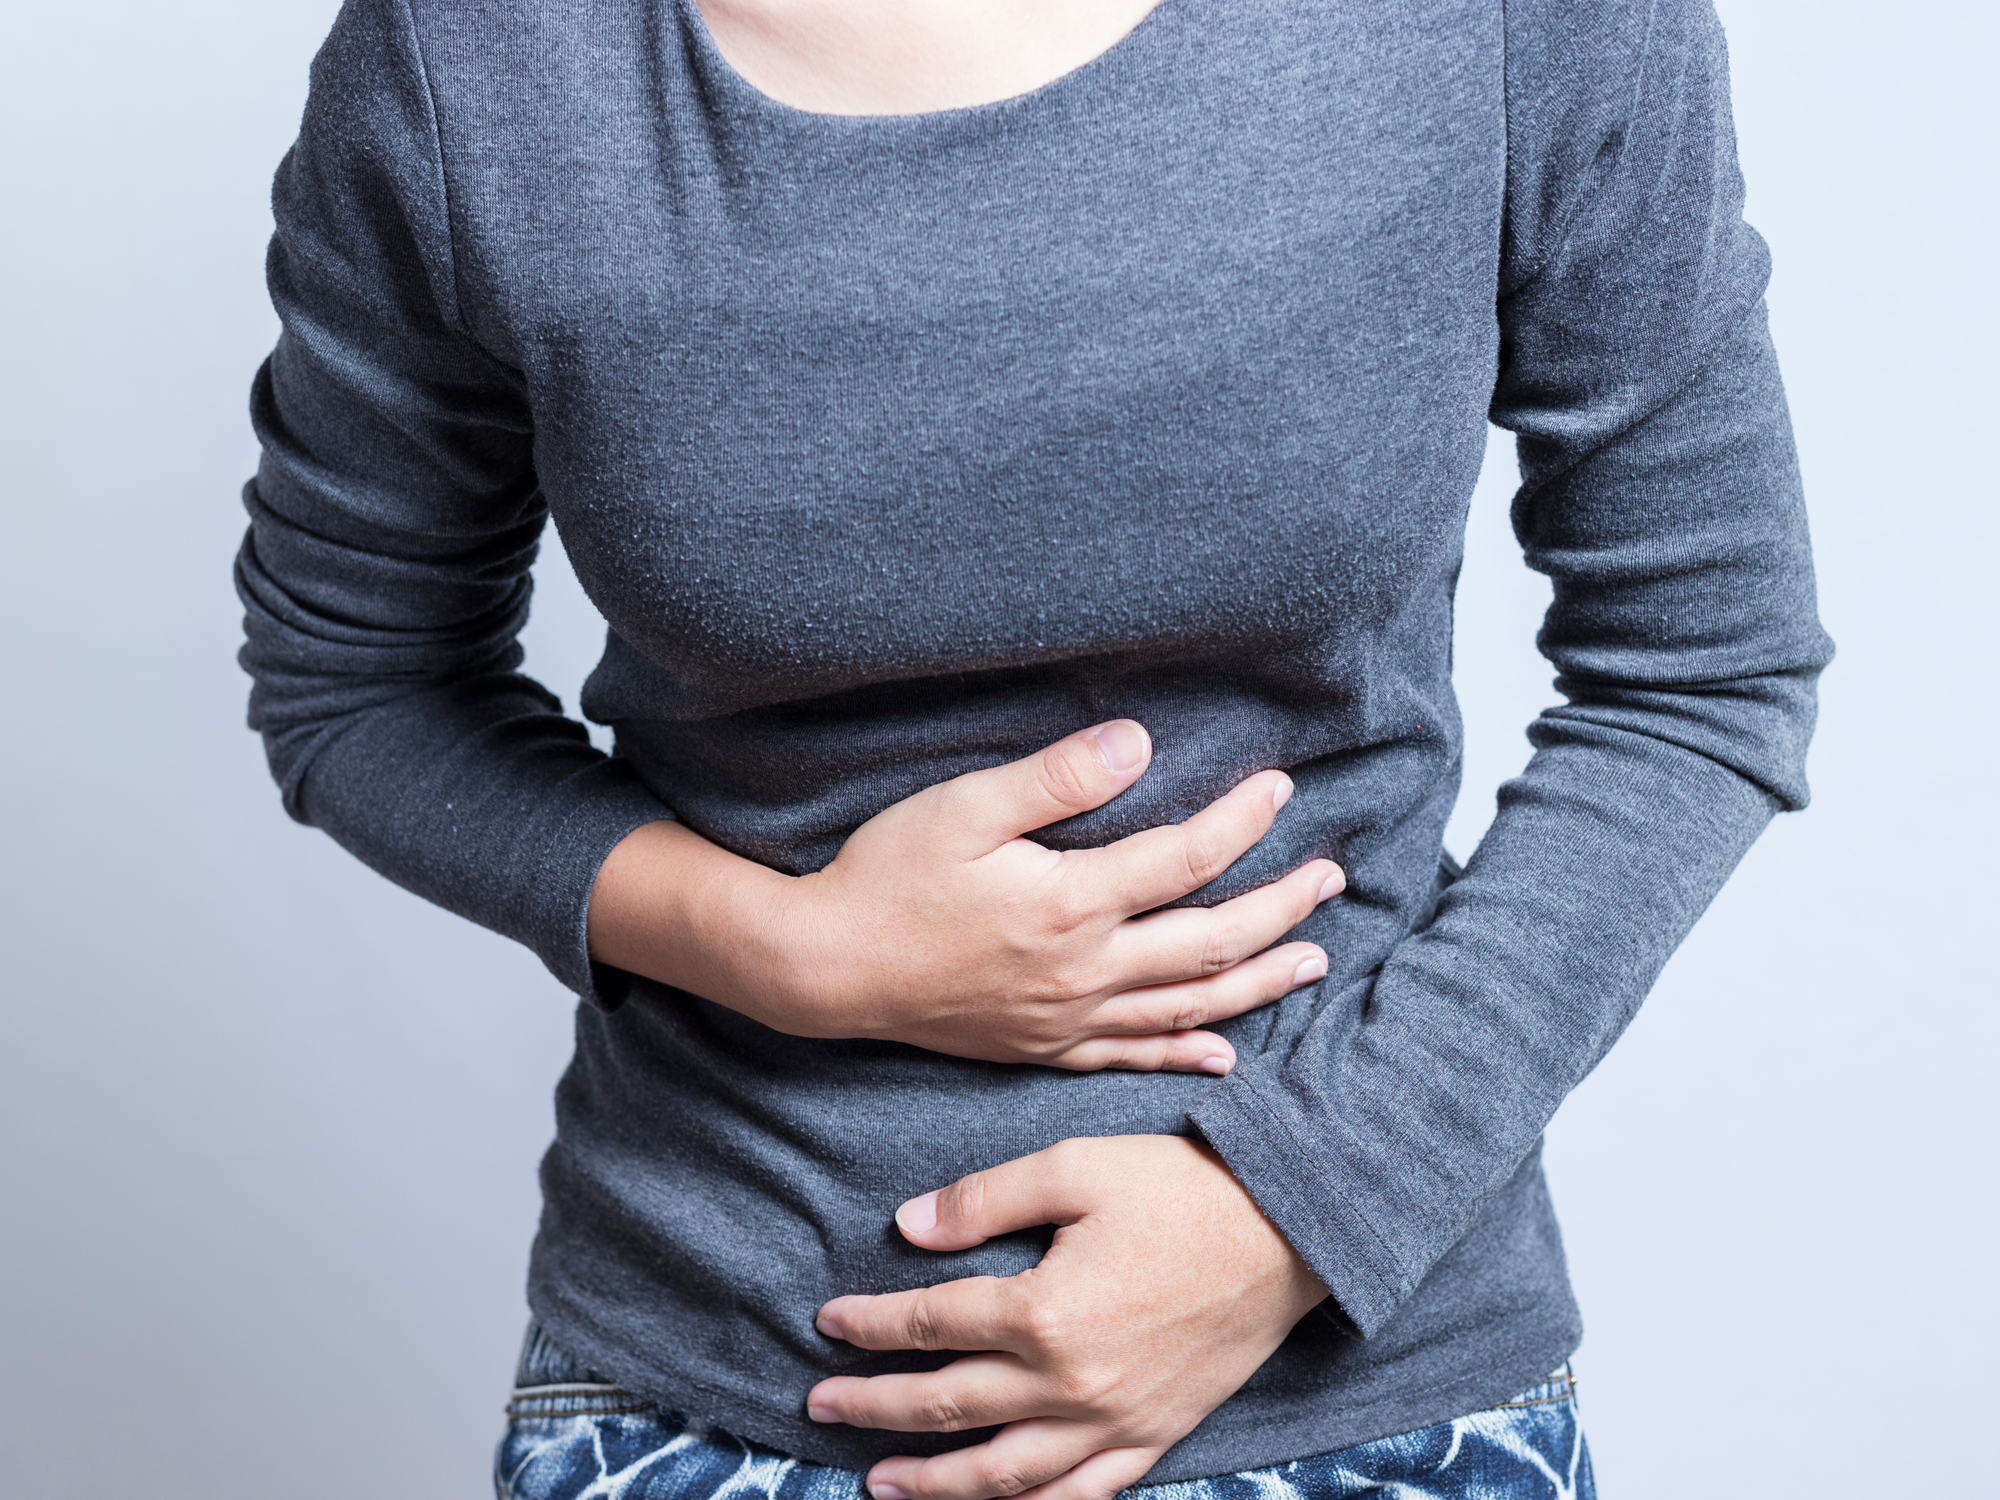 Two ways to get your life back from IBS